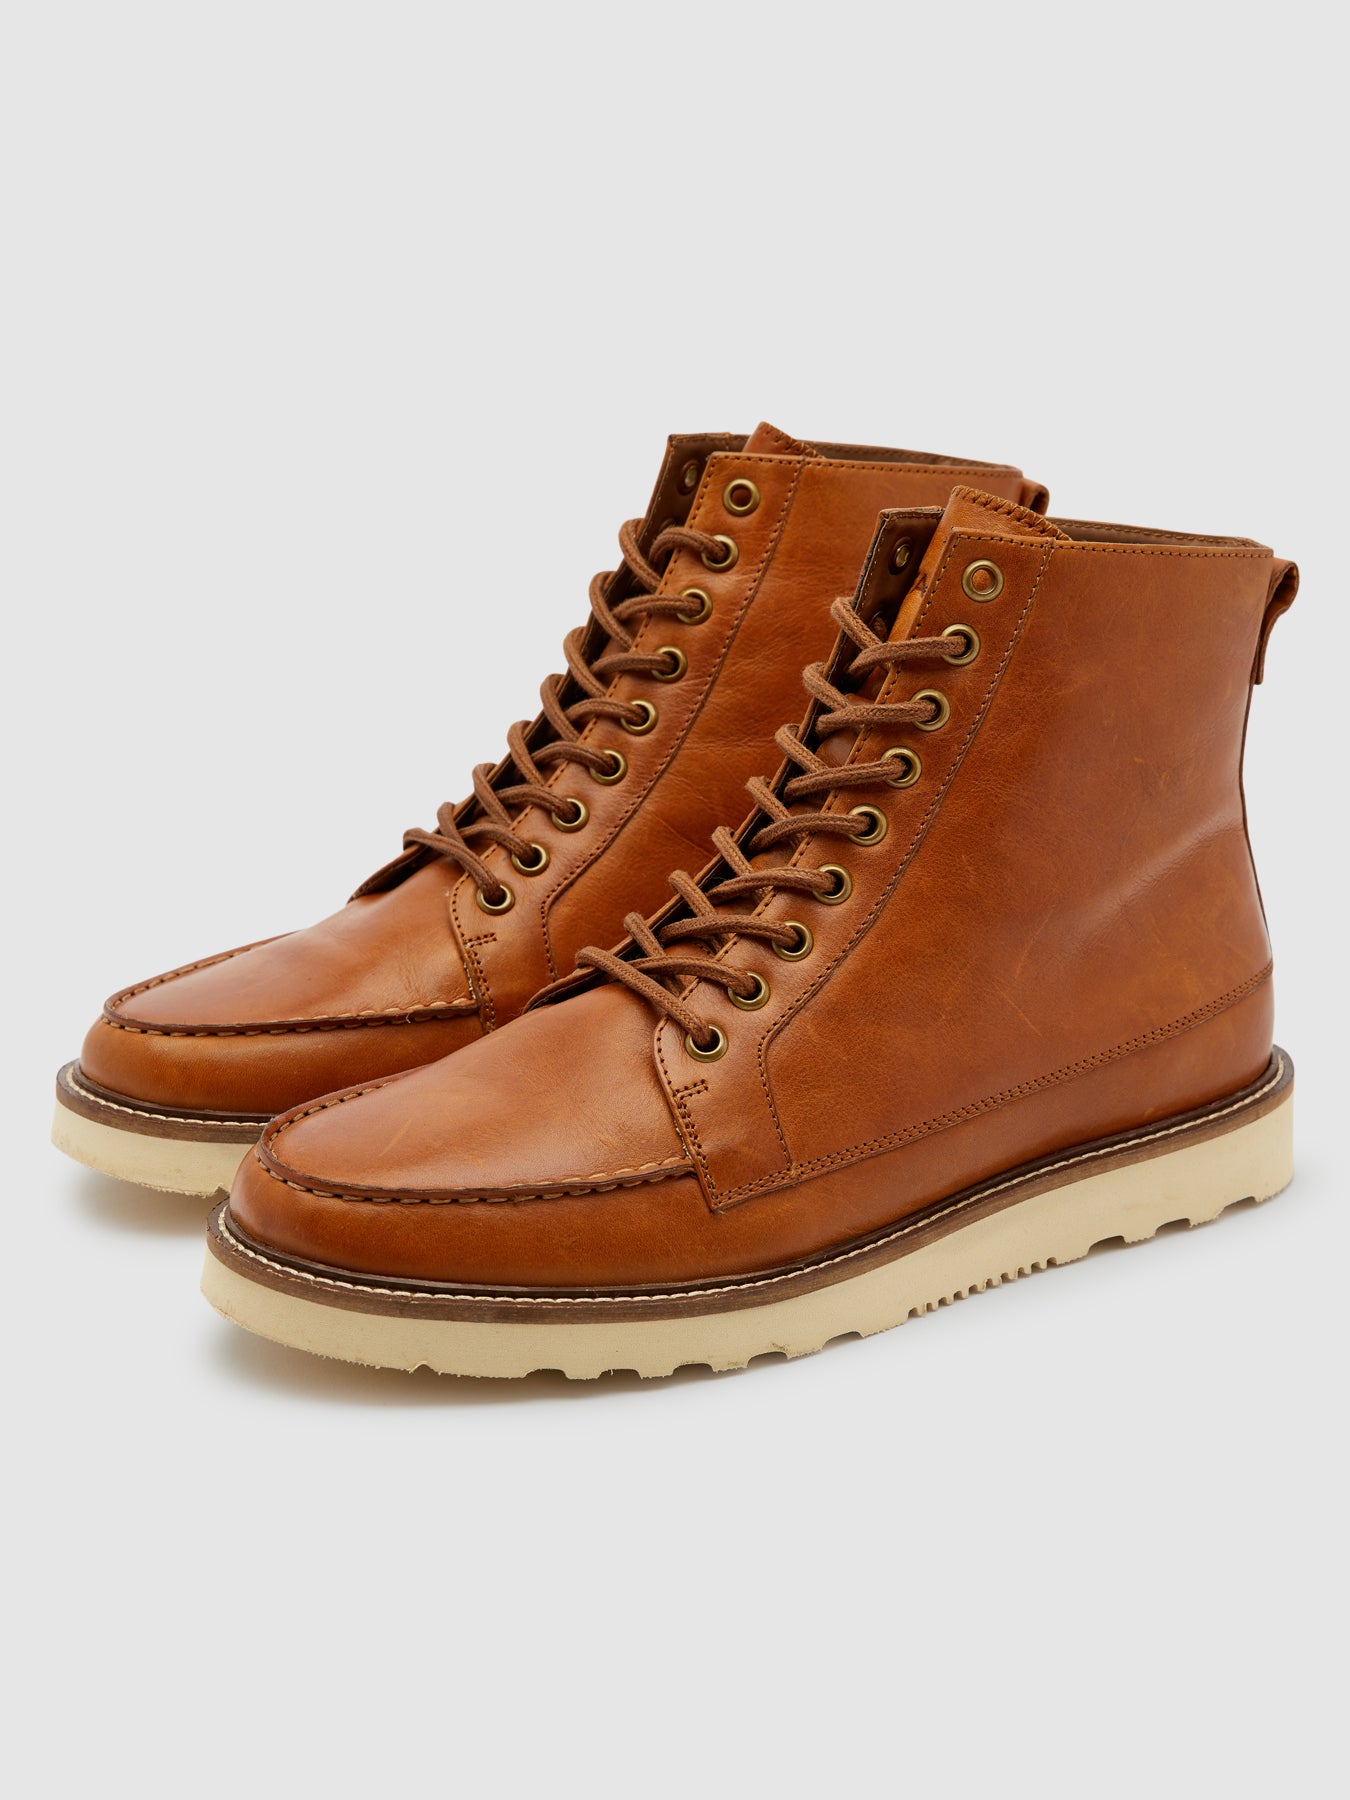 View Pantego Deck Boot In Tan information